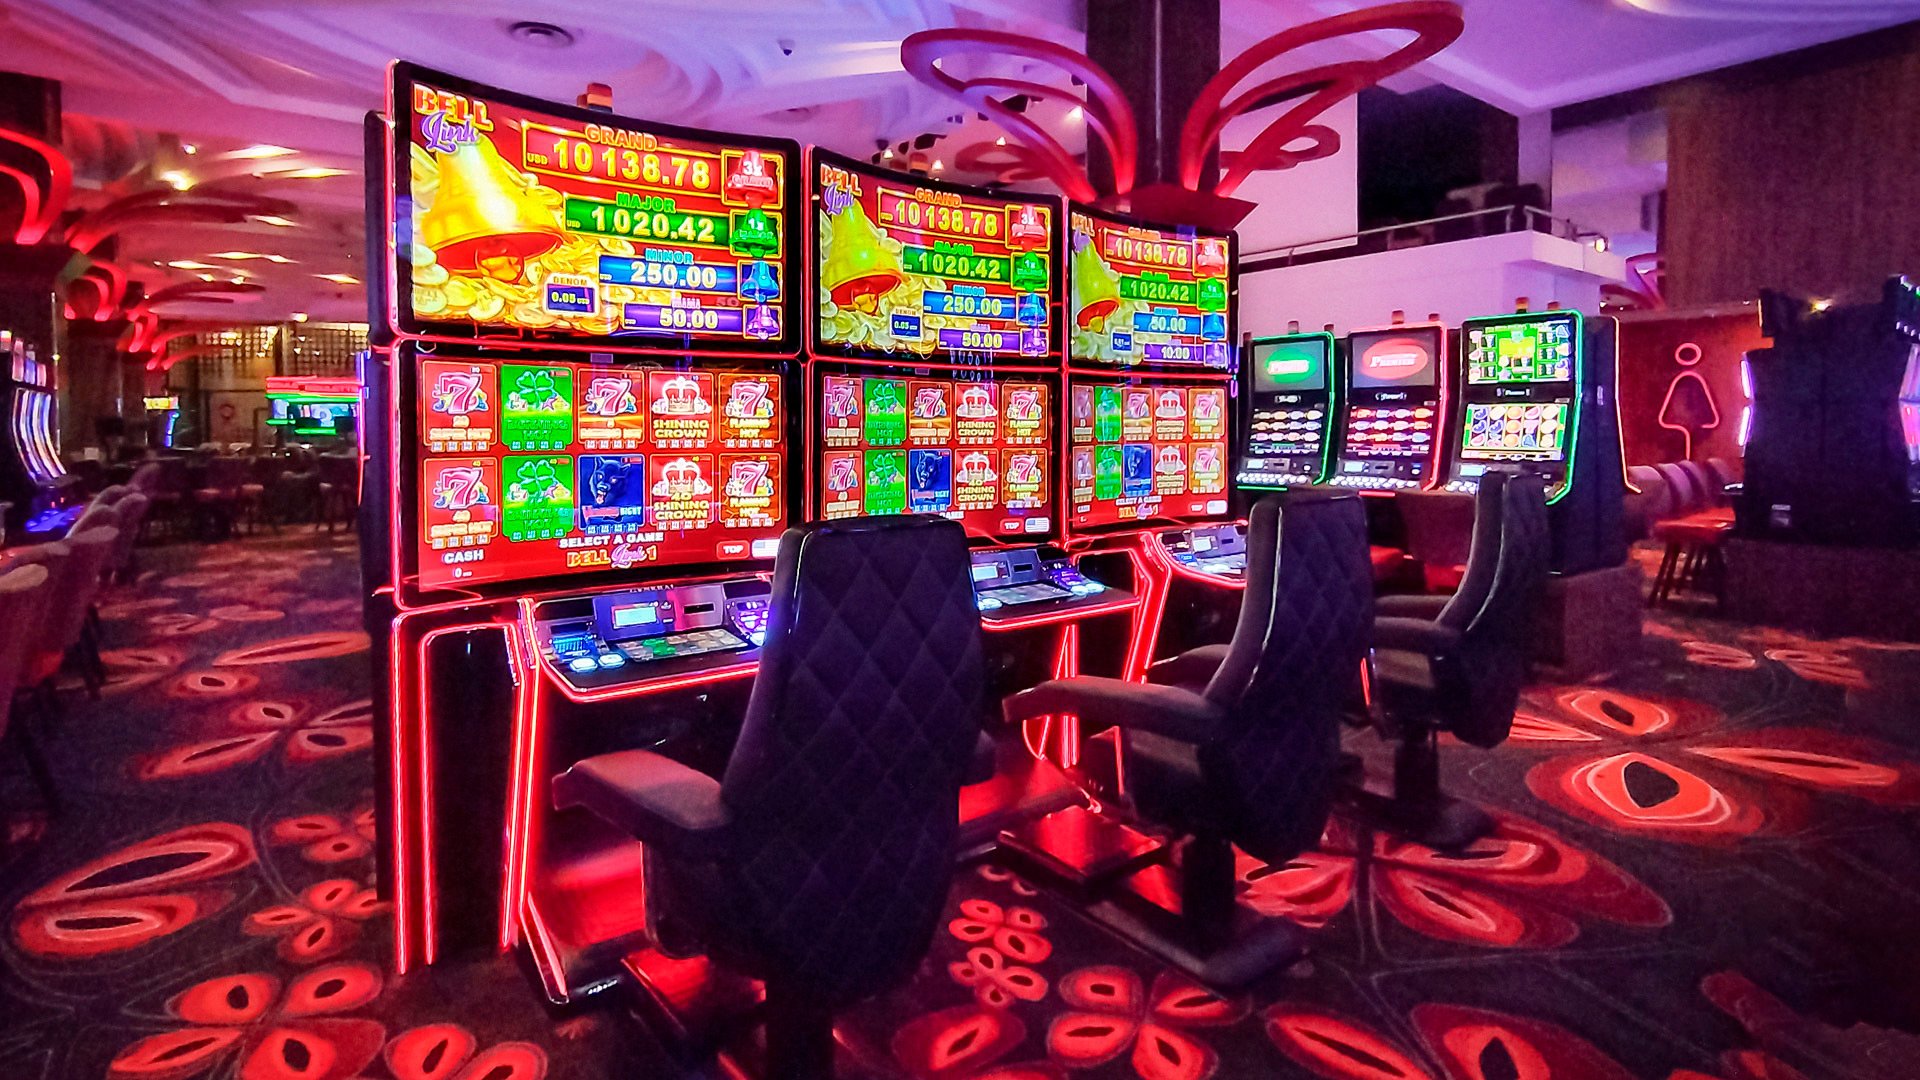 EGT's Bell Link jackpot a succes in Panama with installations in several  casinos | Yogonet International